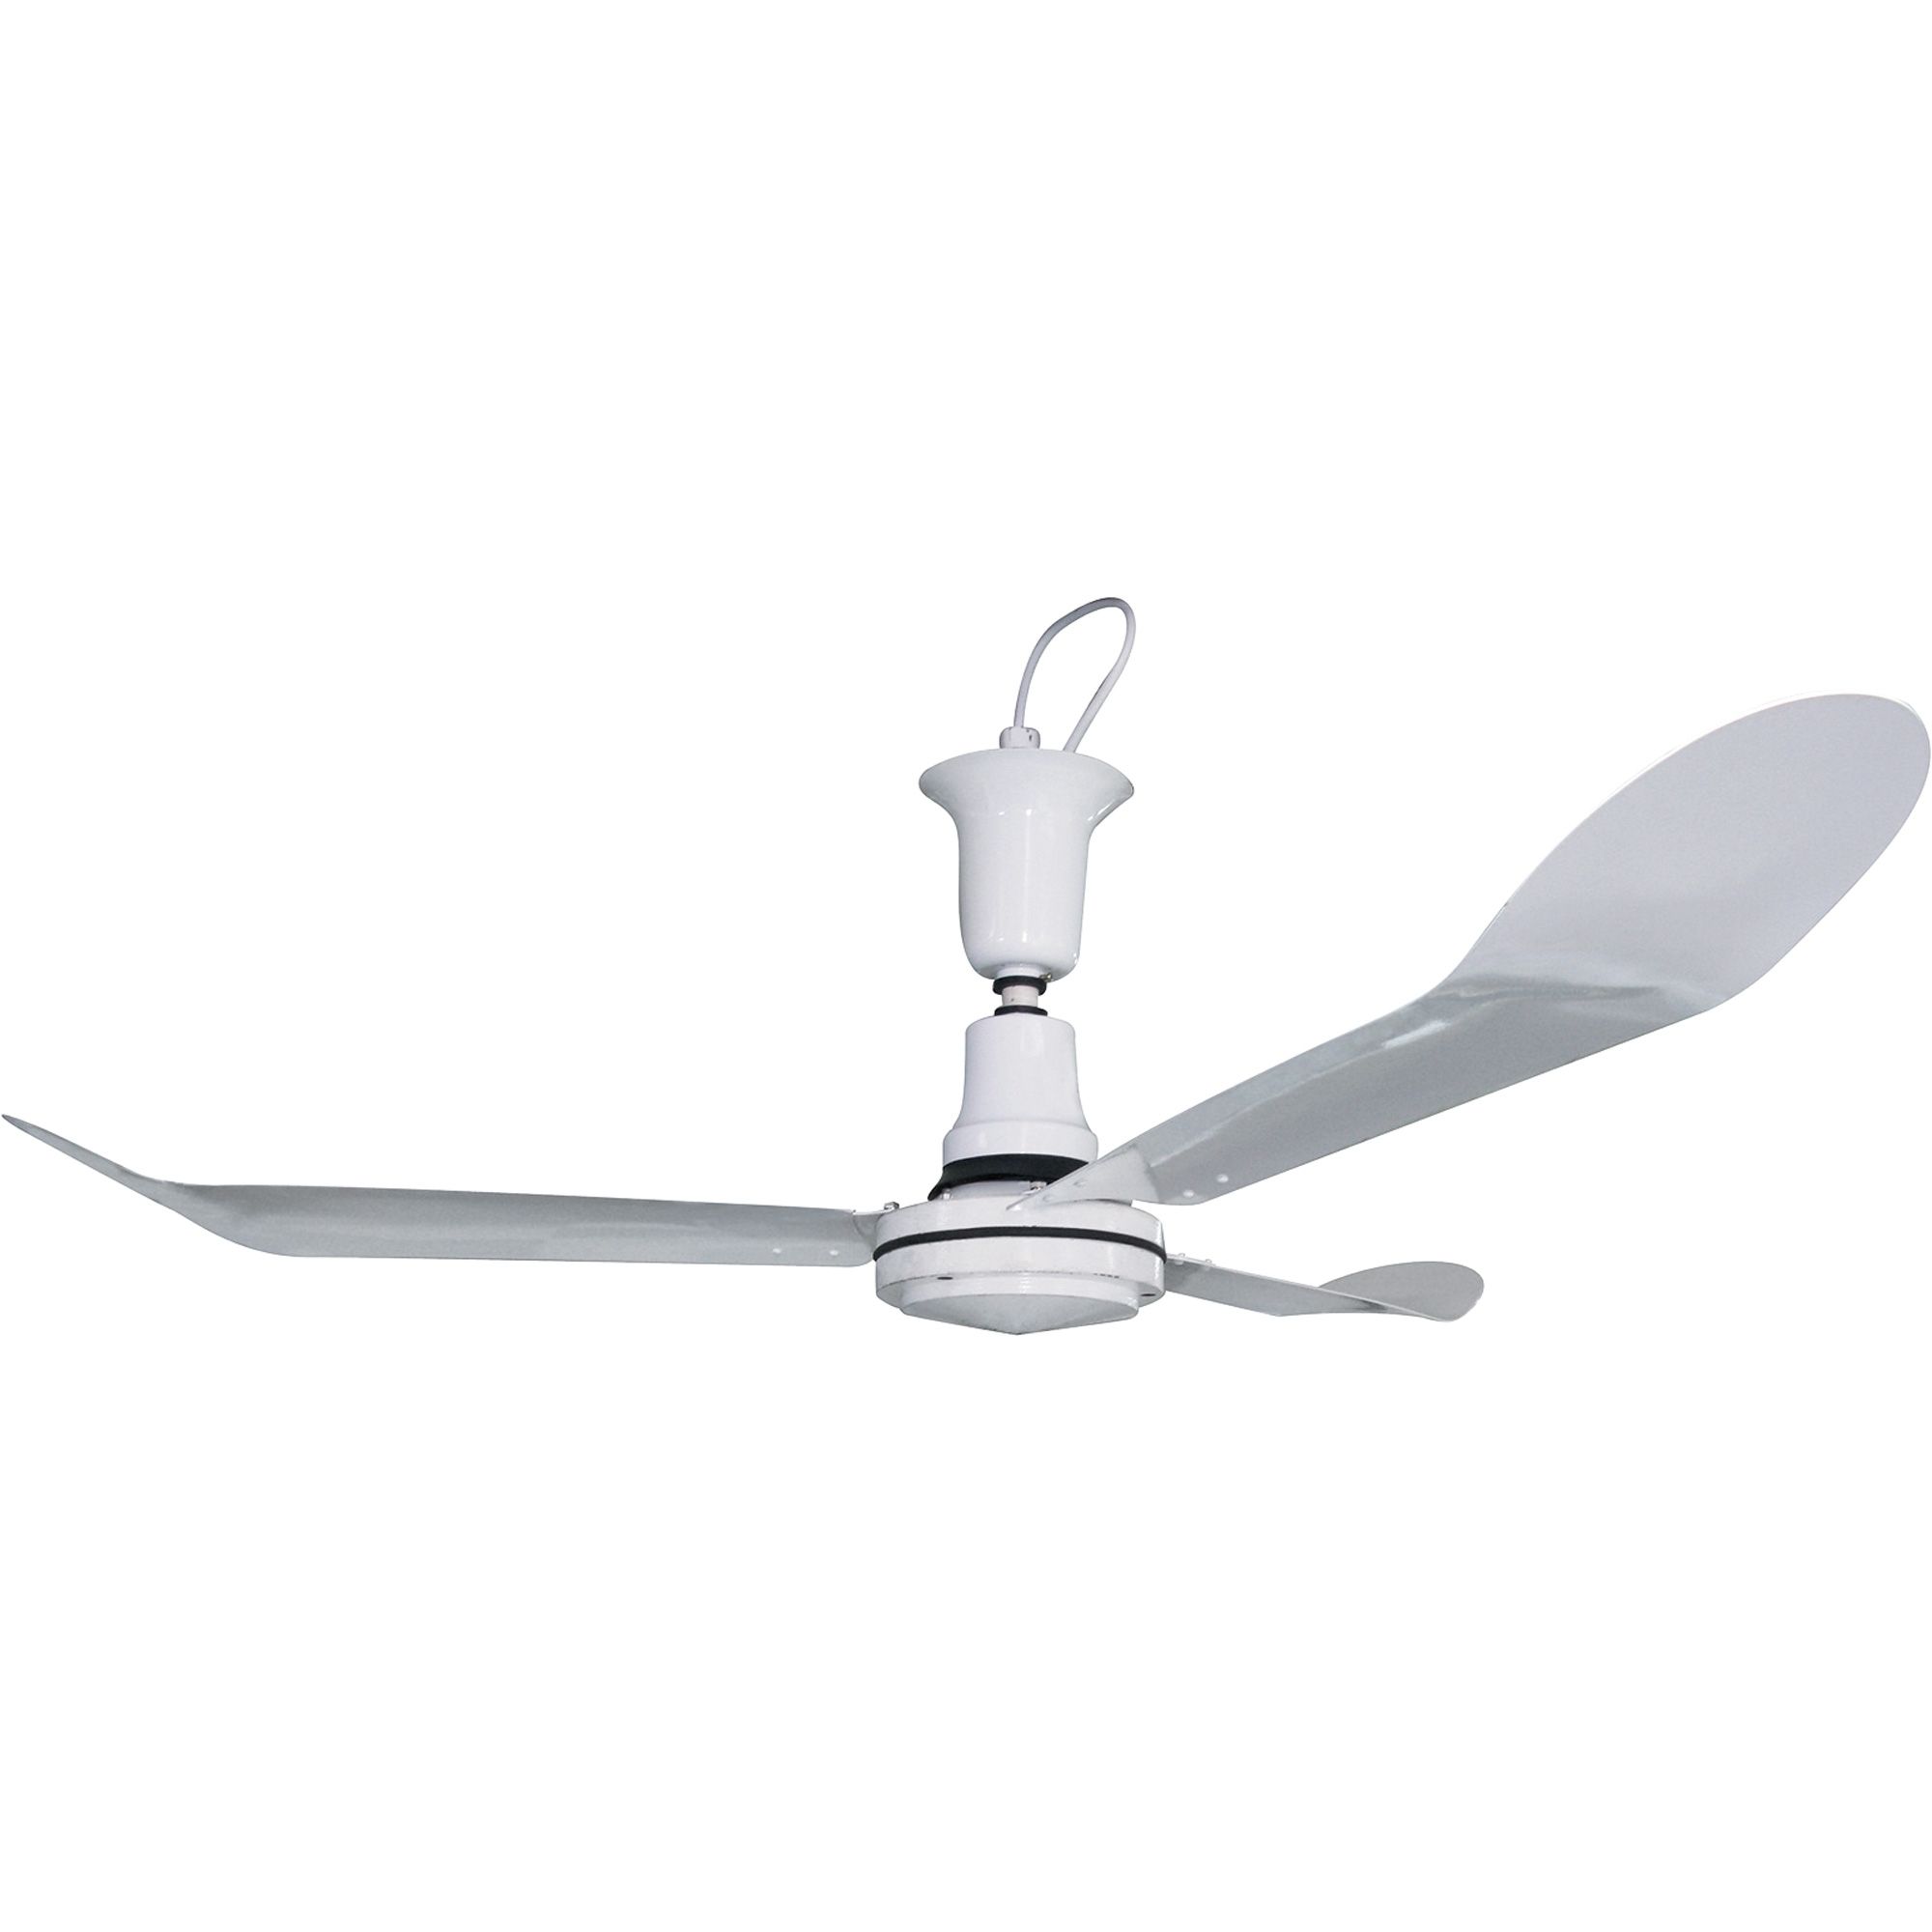 Trendy Outdoor Ceiling Fans Under $100 Throughout J&d Mfg Industrial Fans Garage Shop Fans Renowned Ceiling Fans Under (View 5 of 20)